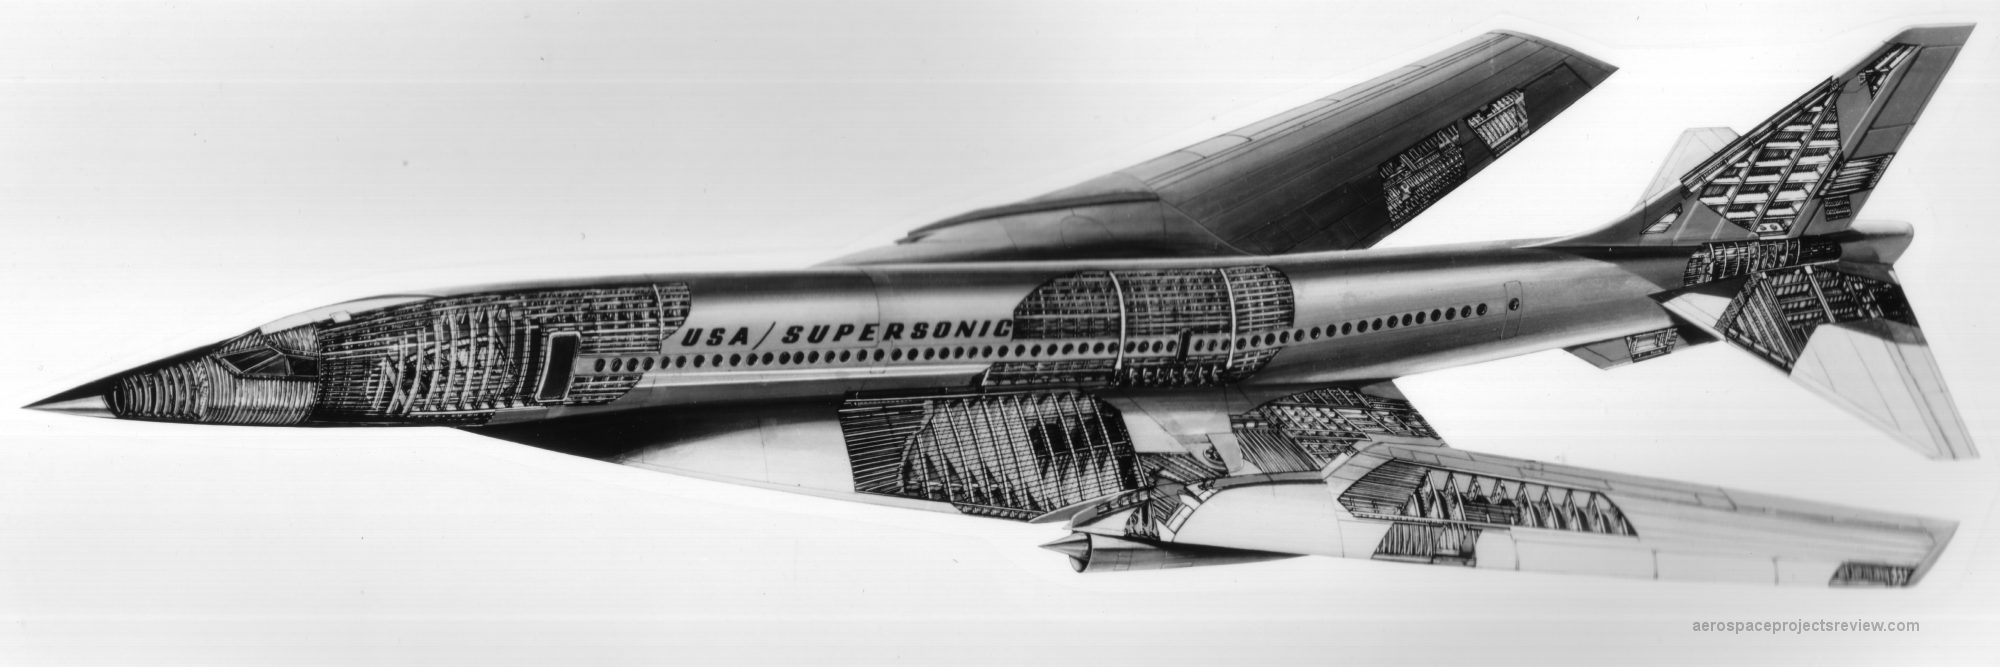 Boeing 733 SST Cutaway - Aerospace Projects Review Blog.